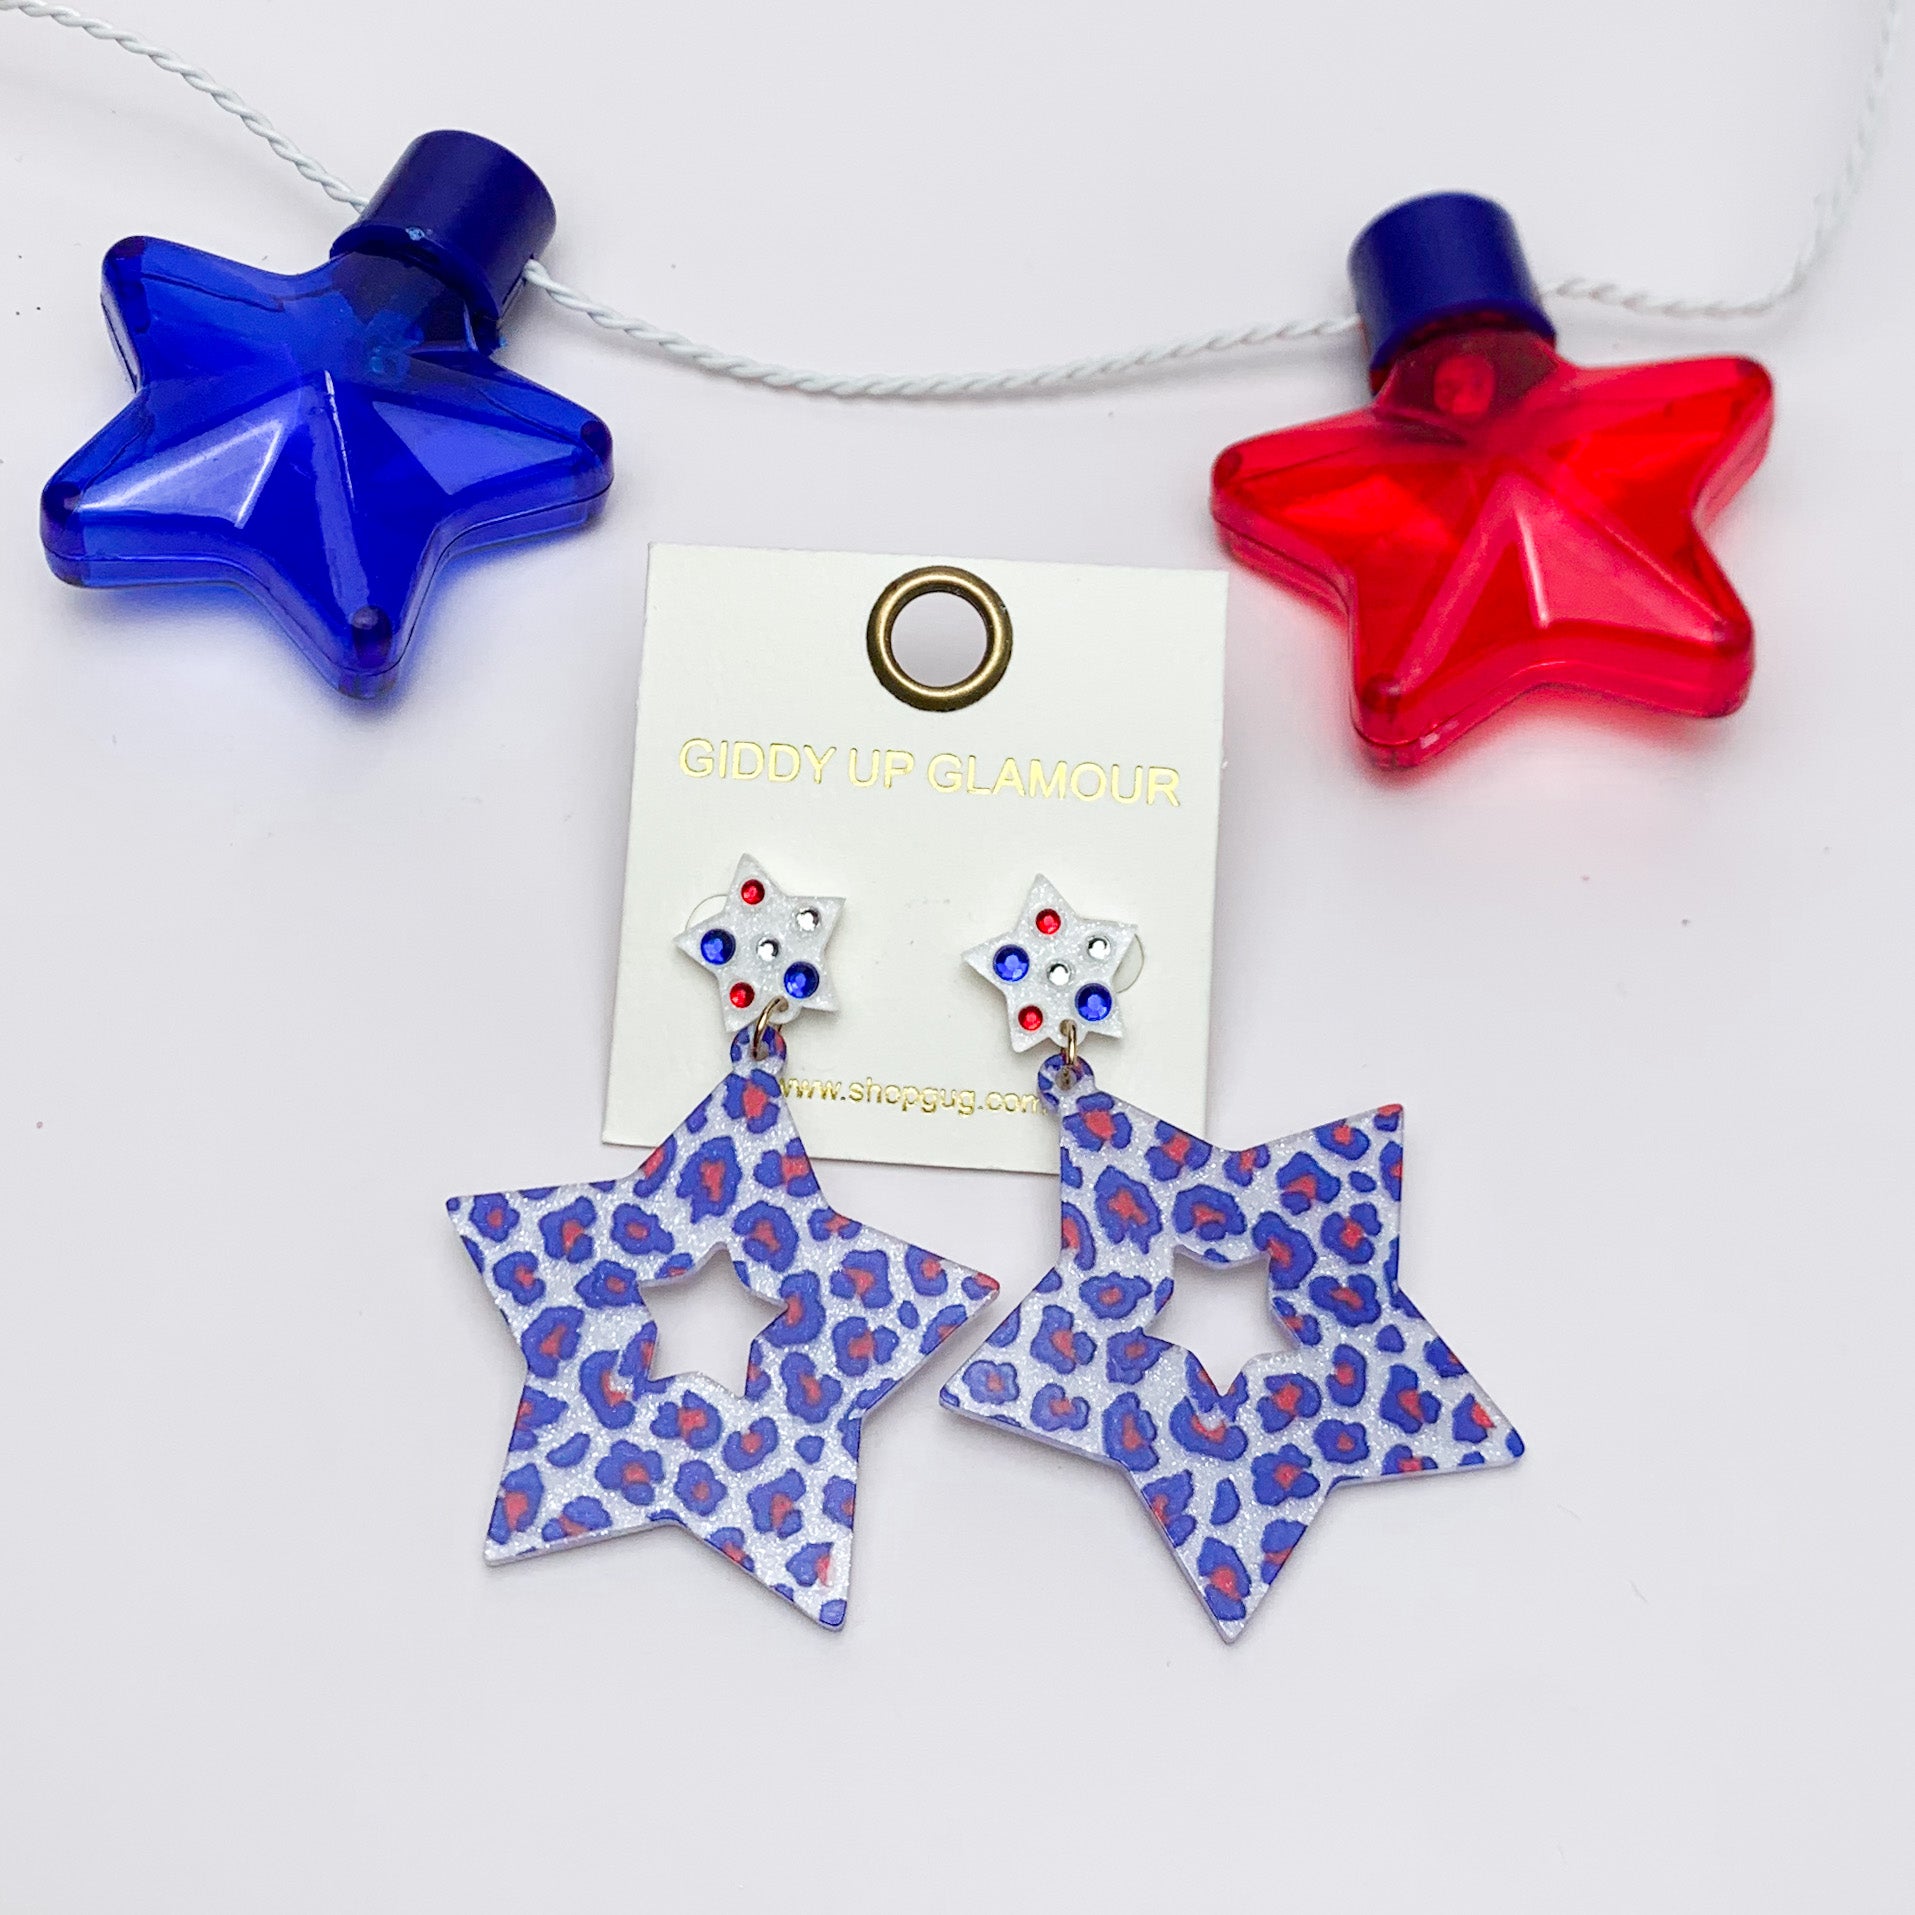 USA Fashionista Star Earrings in Red, White, and Blue. Pictured on a white background with a red and blue star above for decoration.